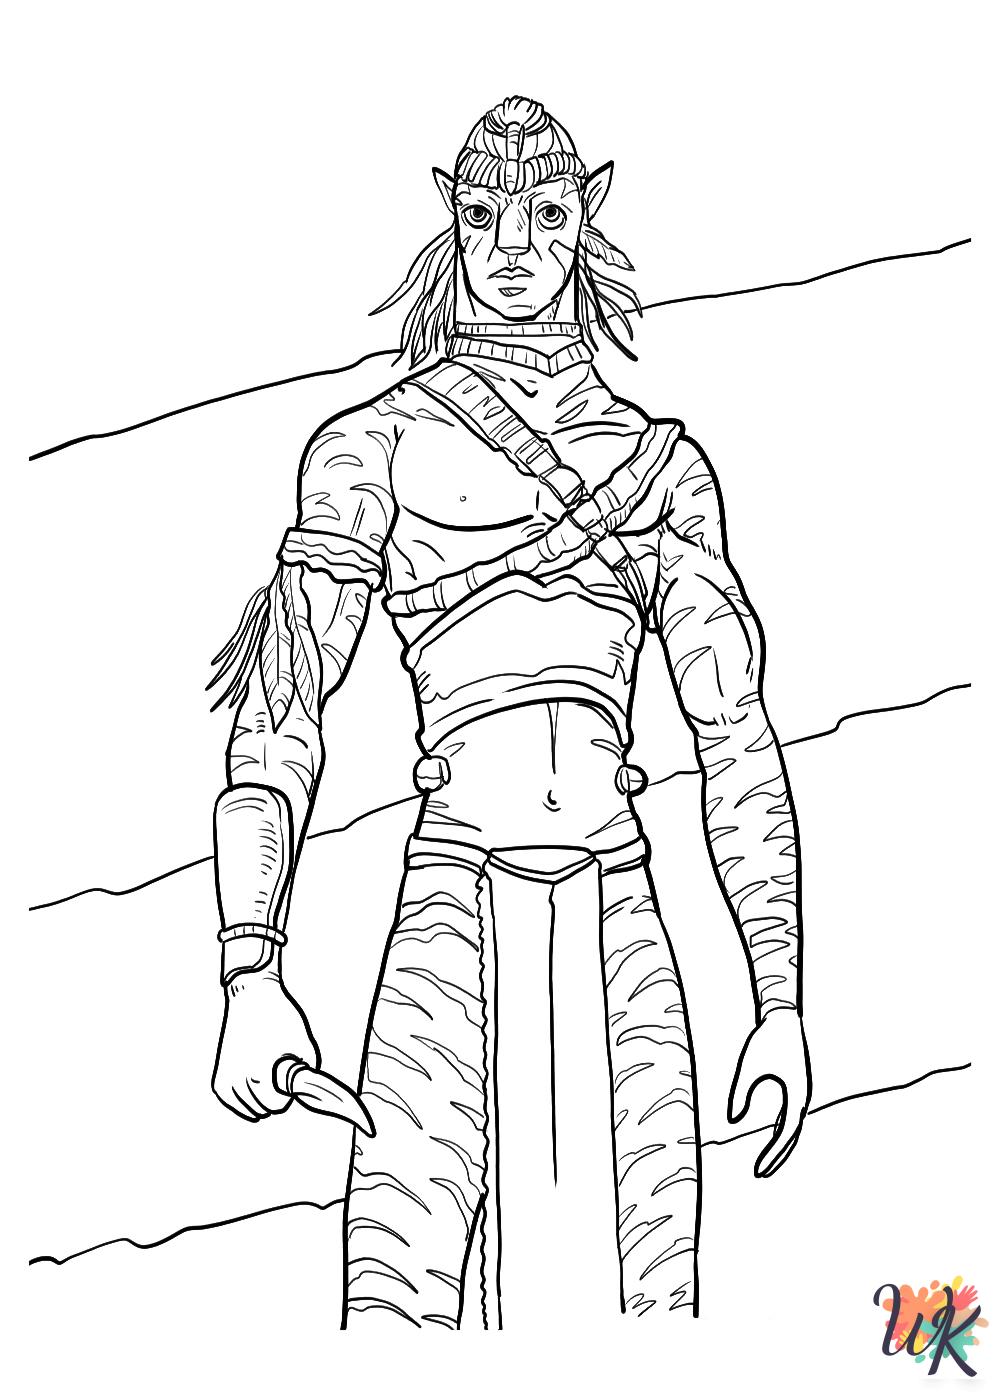 old-fashioned Avatar coloring pages